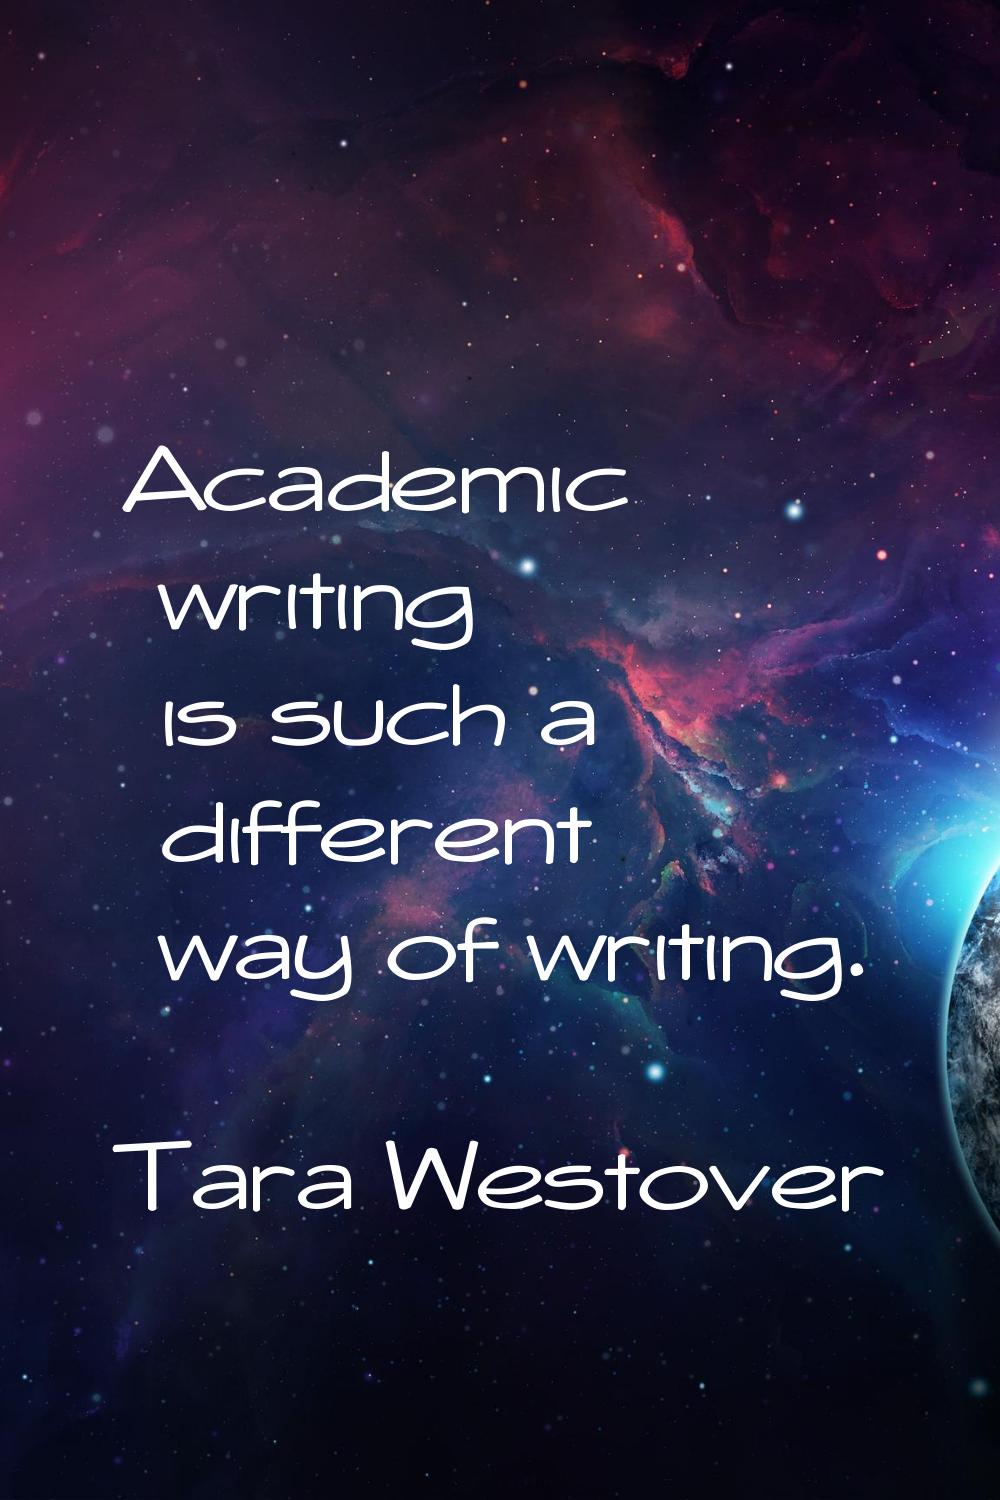 Academic writing is such a different way of writing.